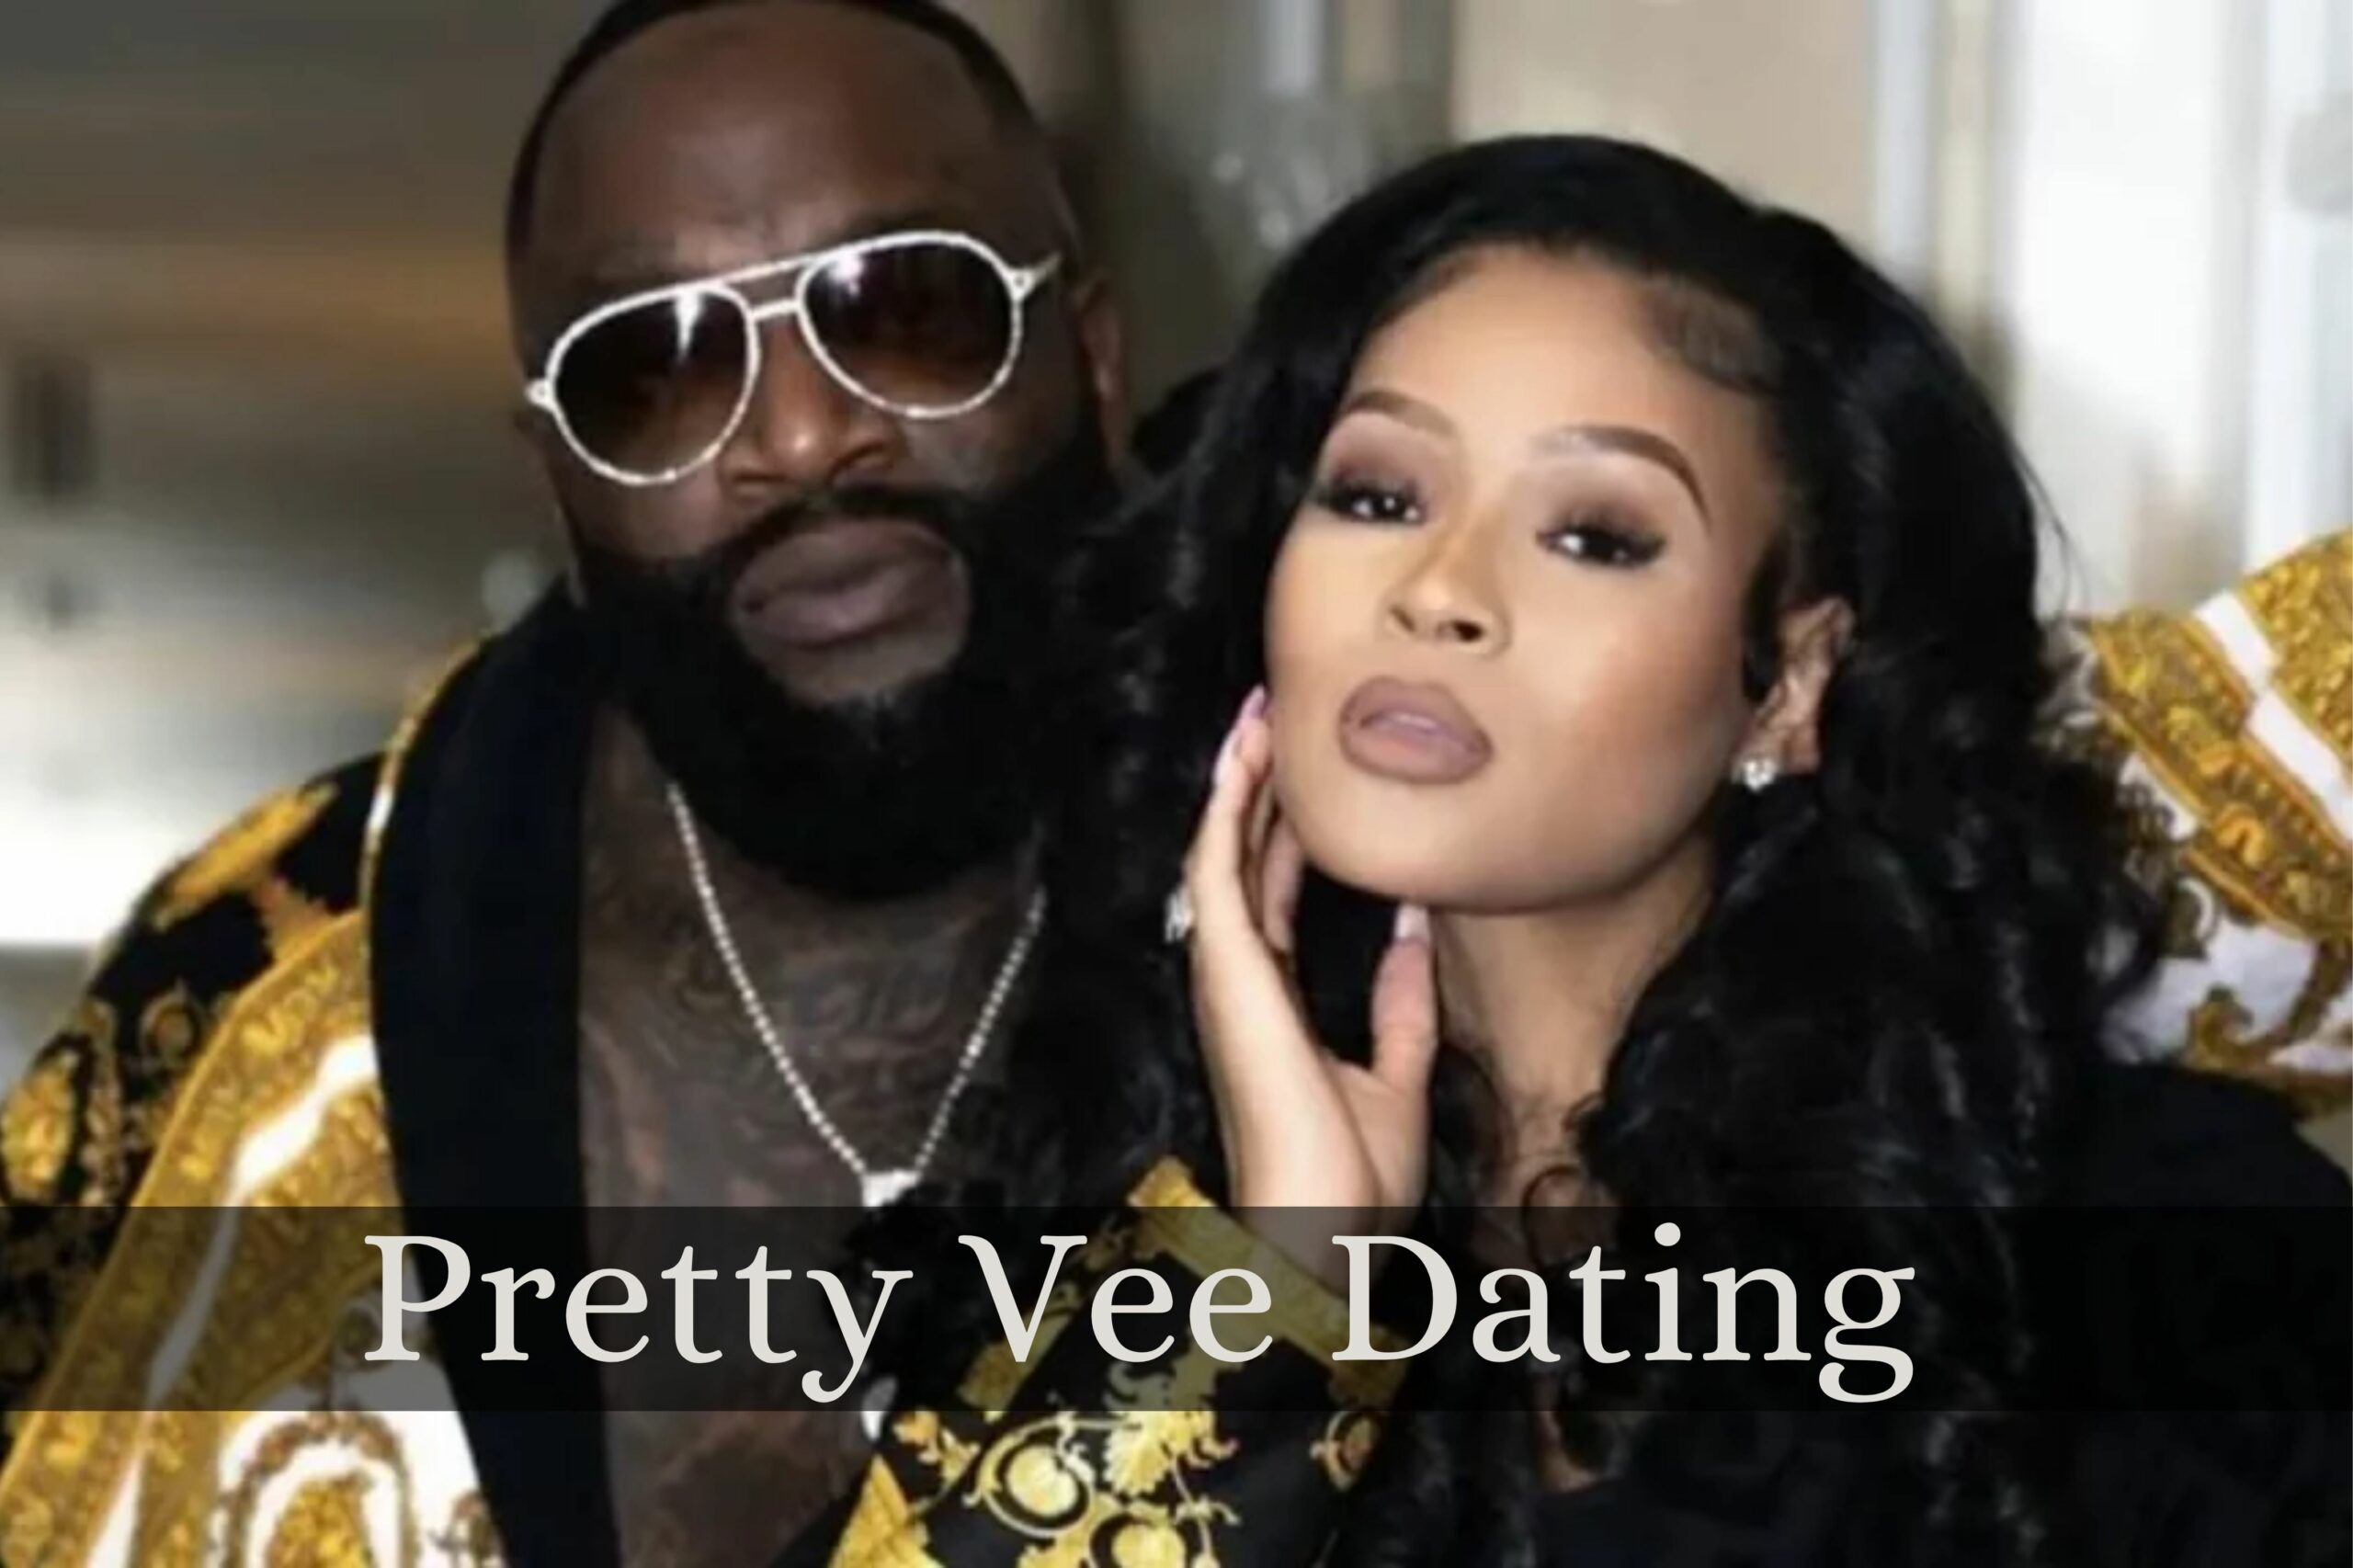 Who Is Pretty Vee Dating Now? Does Rick Ross & Pretty Vee Have A Relationship?